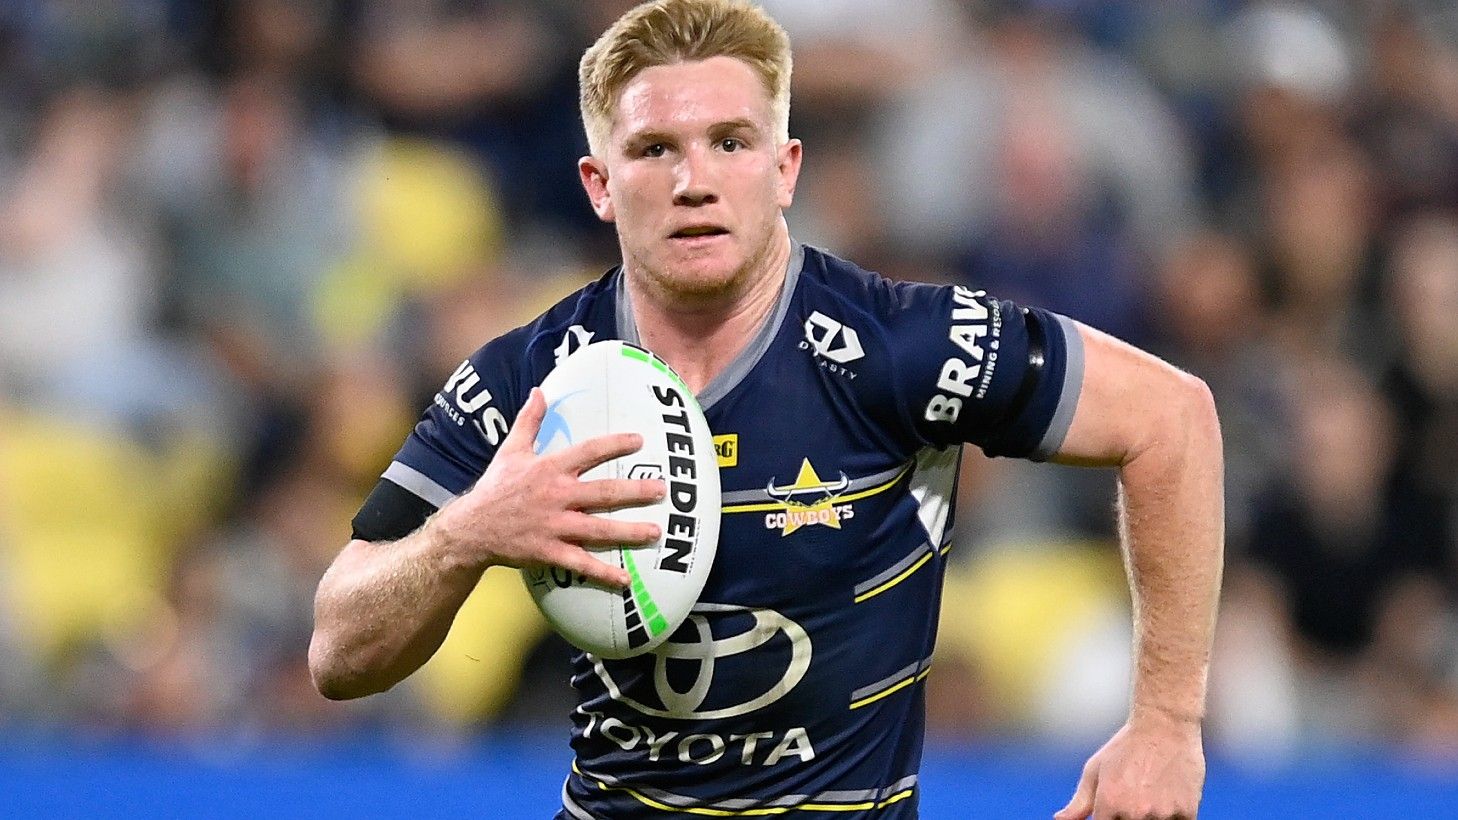 EXCLUSIVE: Team selection that Cowboys could rue as Tom Dearden injury causes chaos